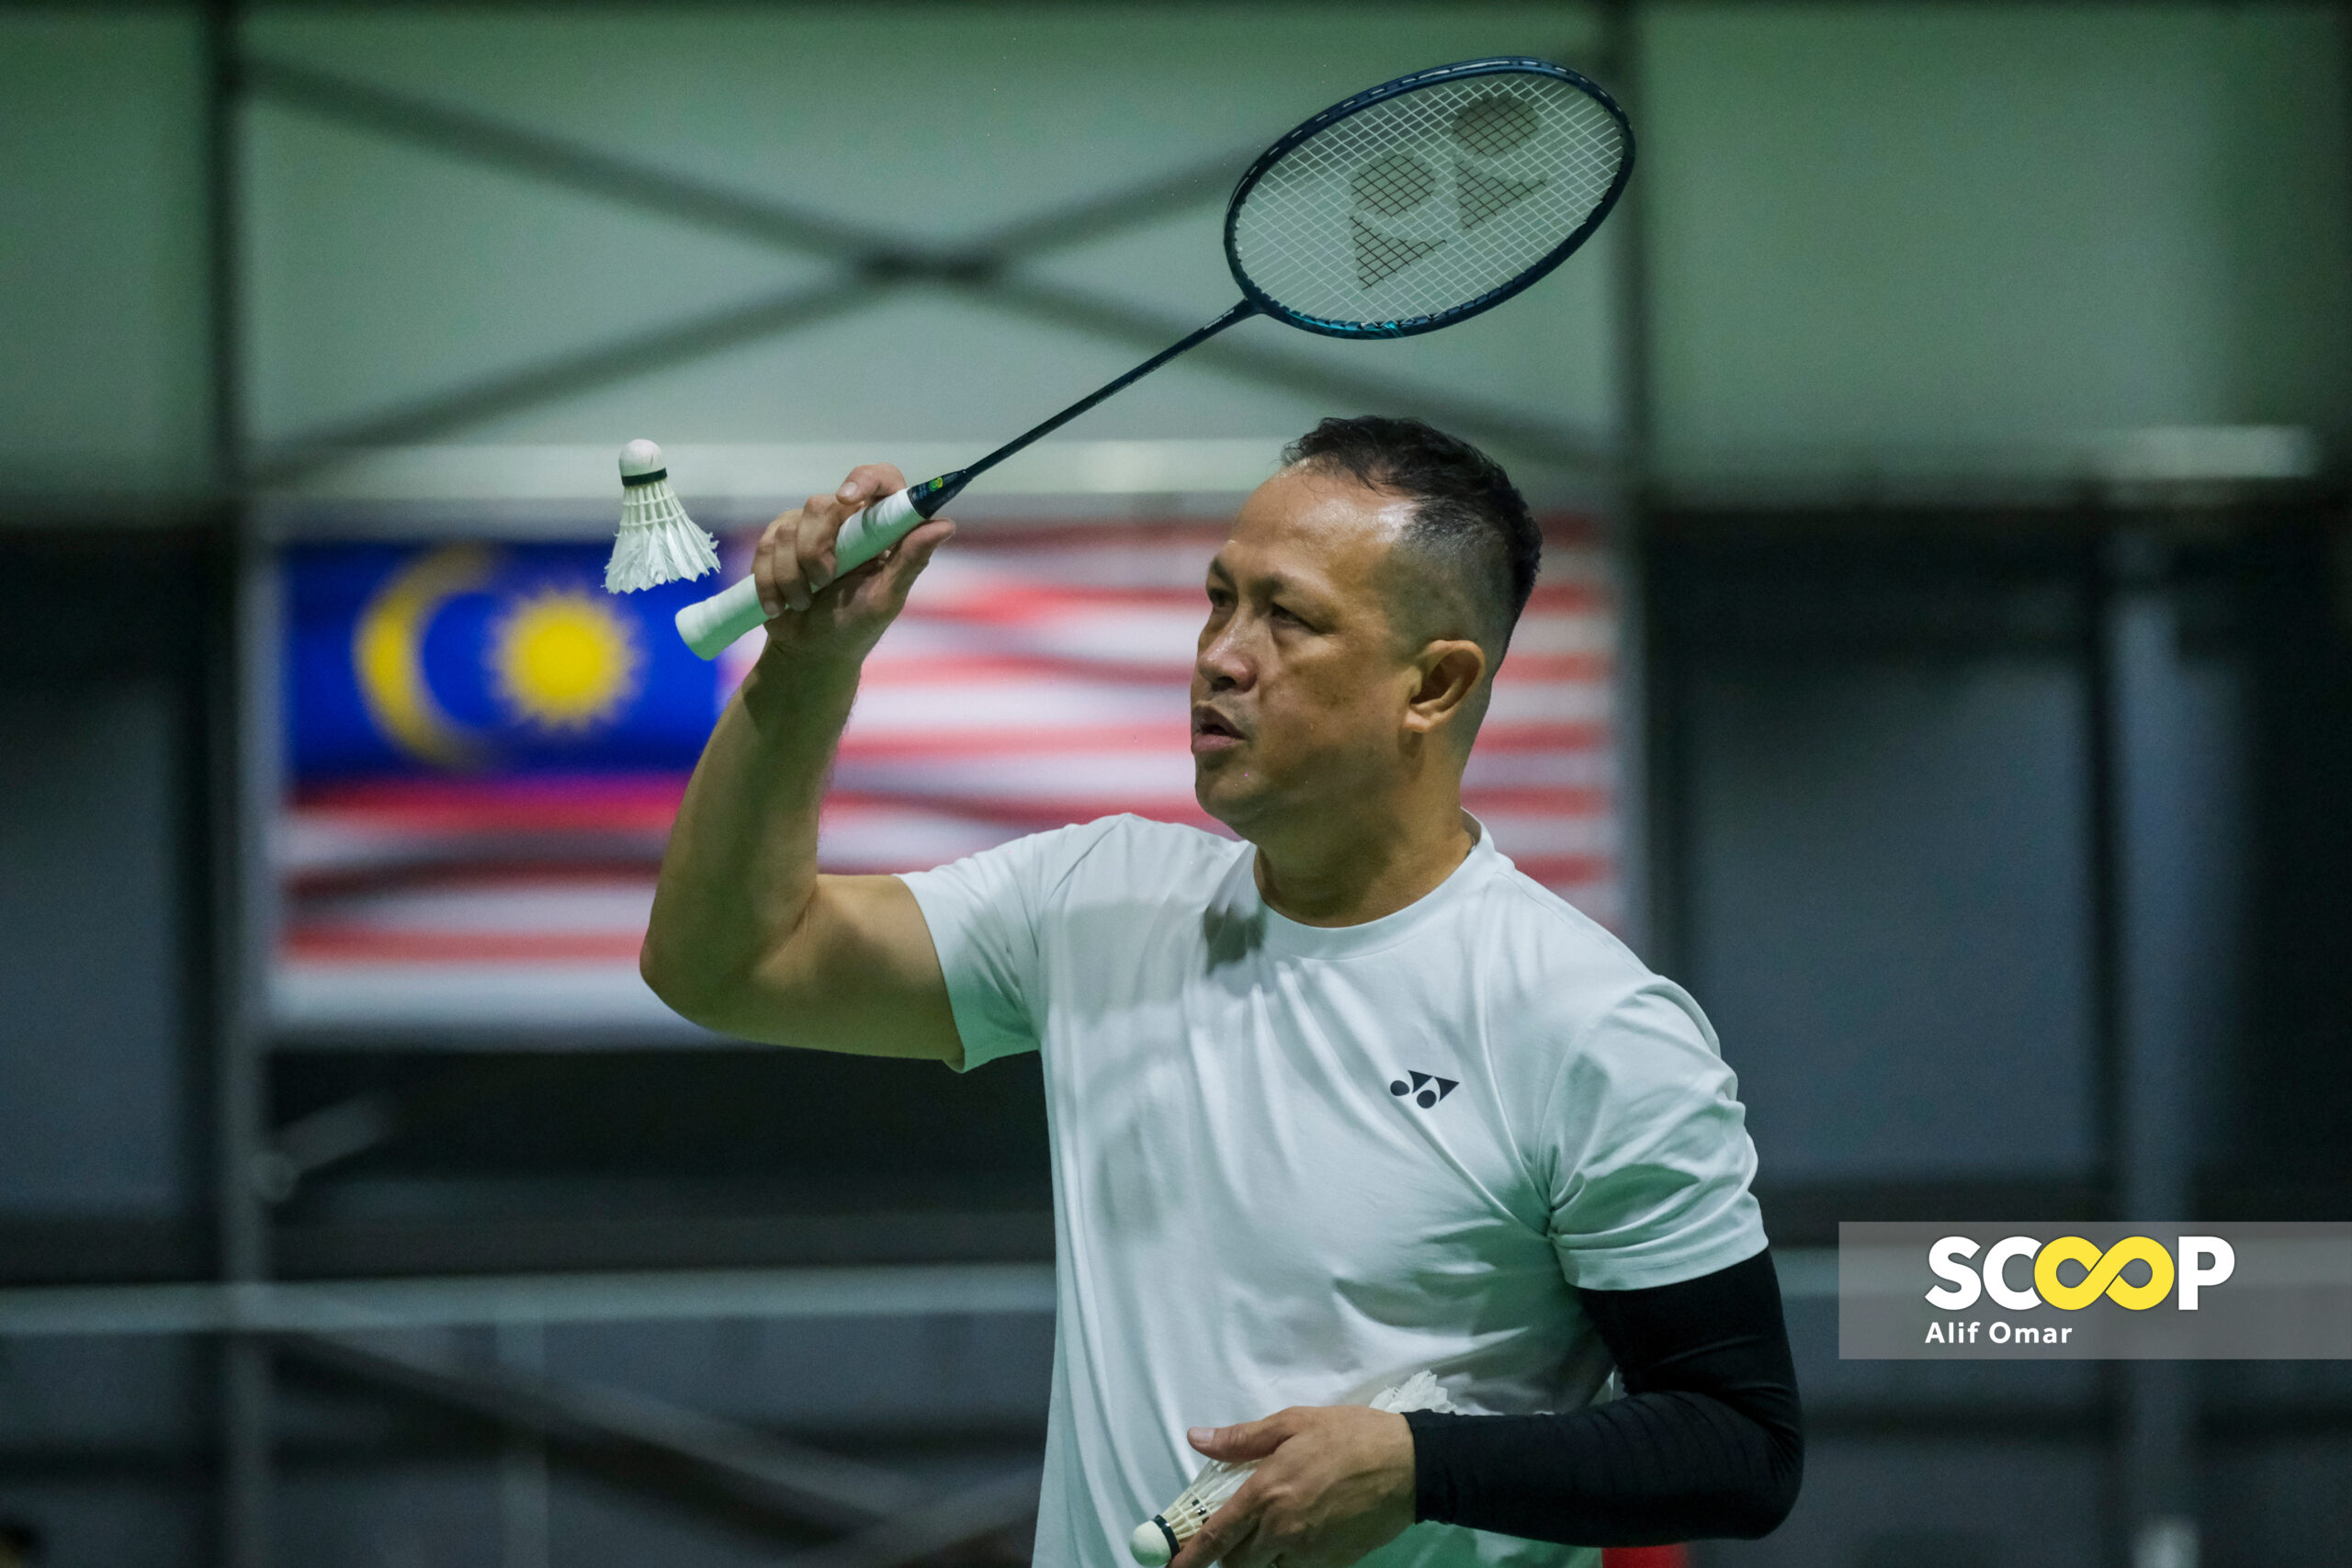 Tze Yong’s participation in Thomas Cup once again shrouded in uncertainty 